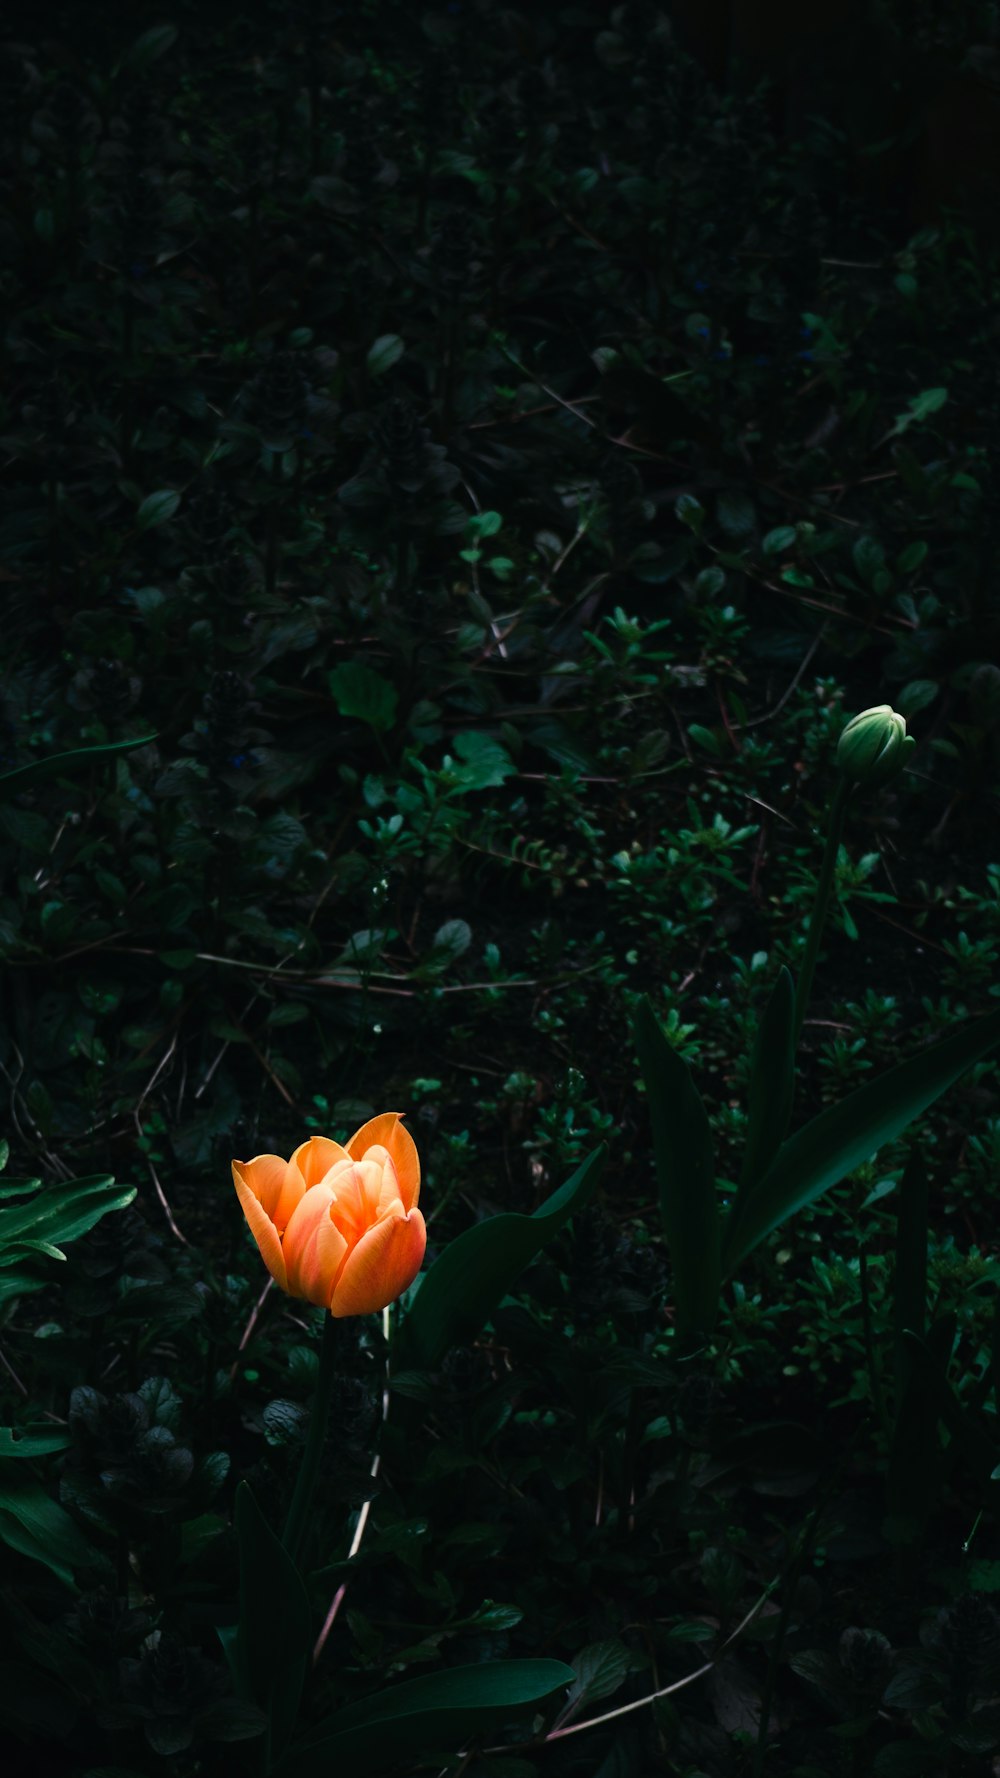 a single orange flower in the middle of a forest